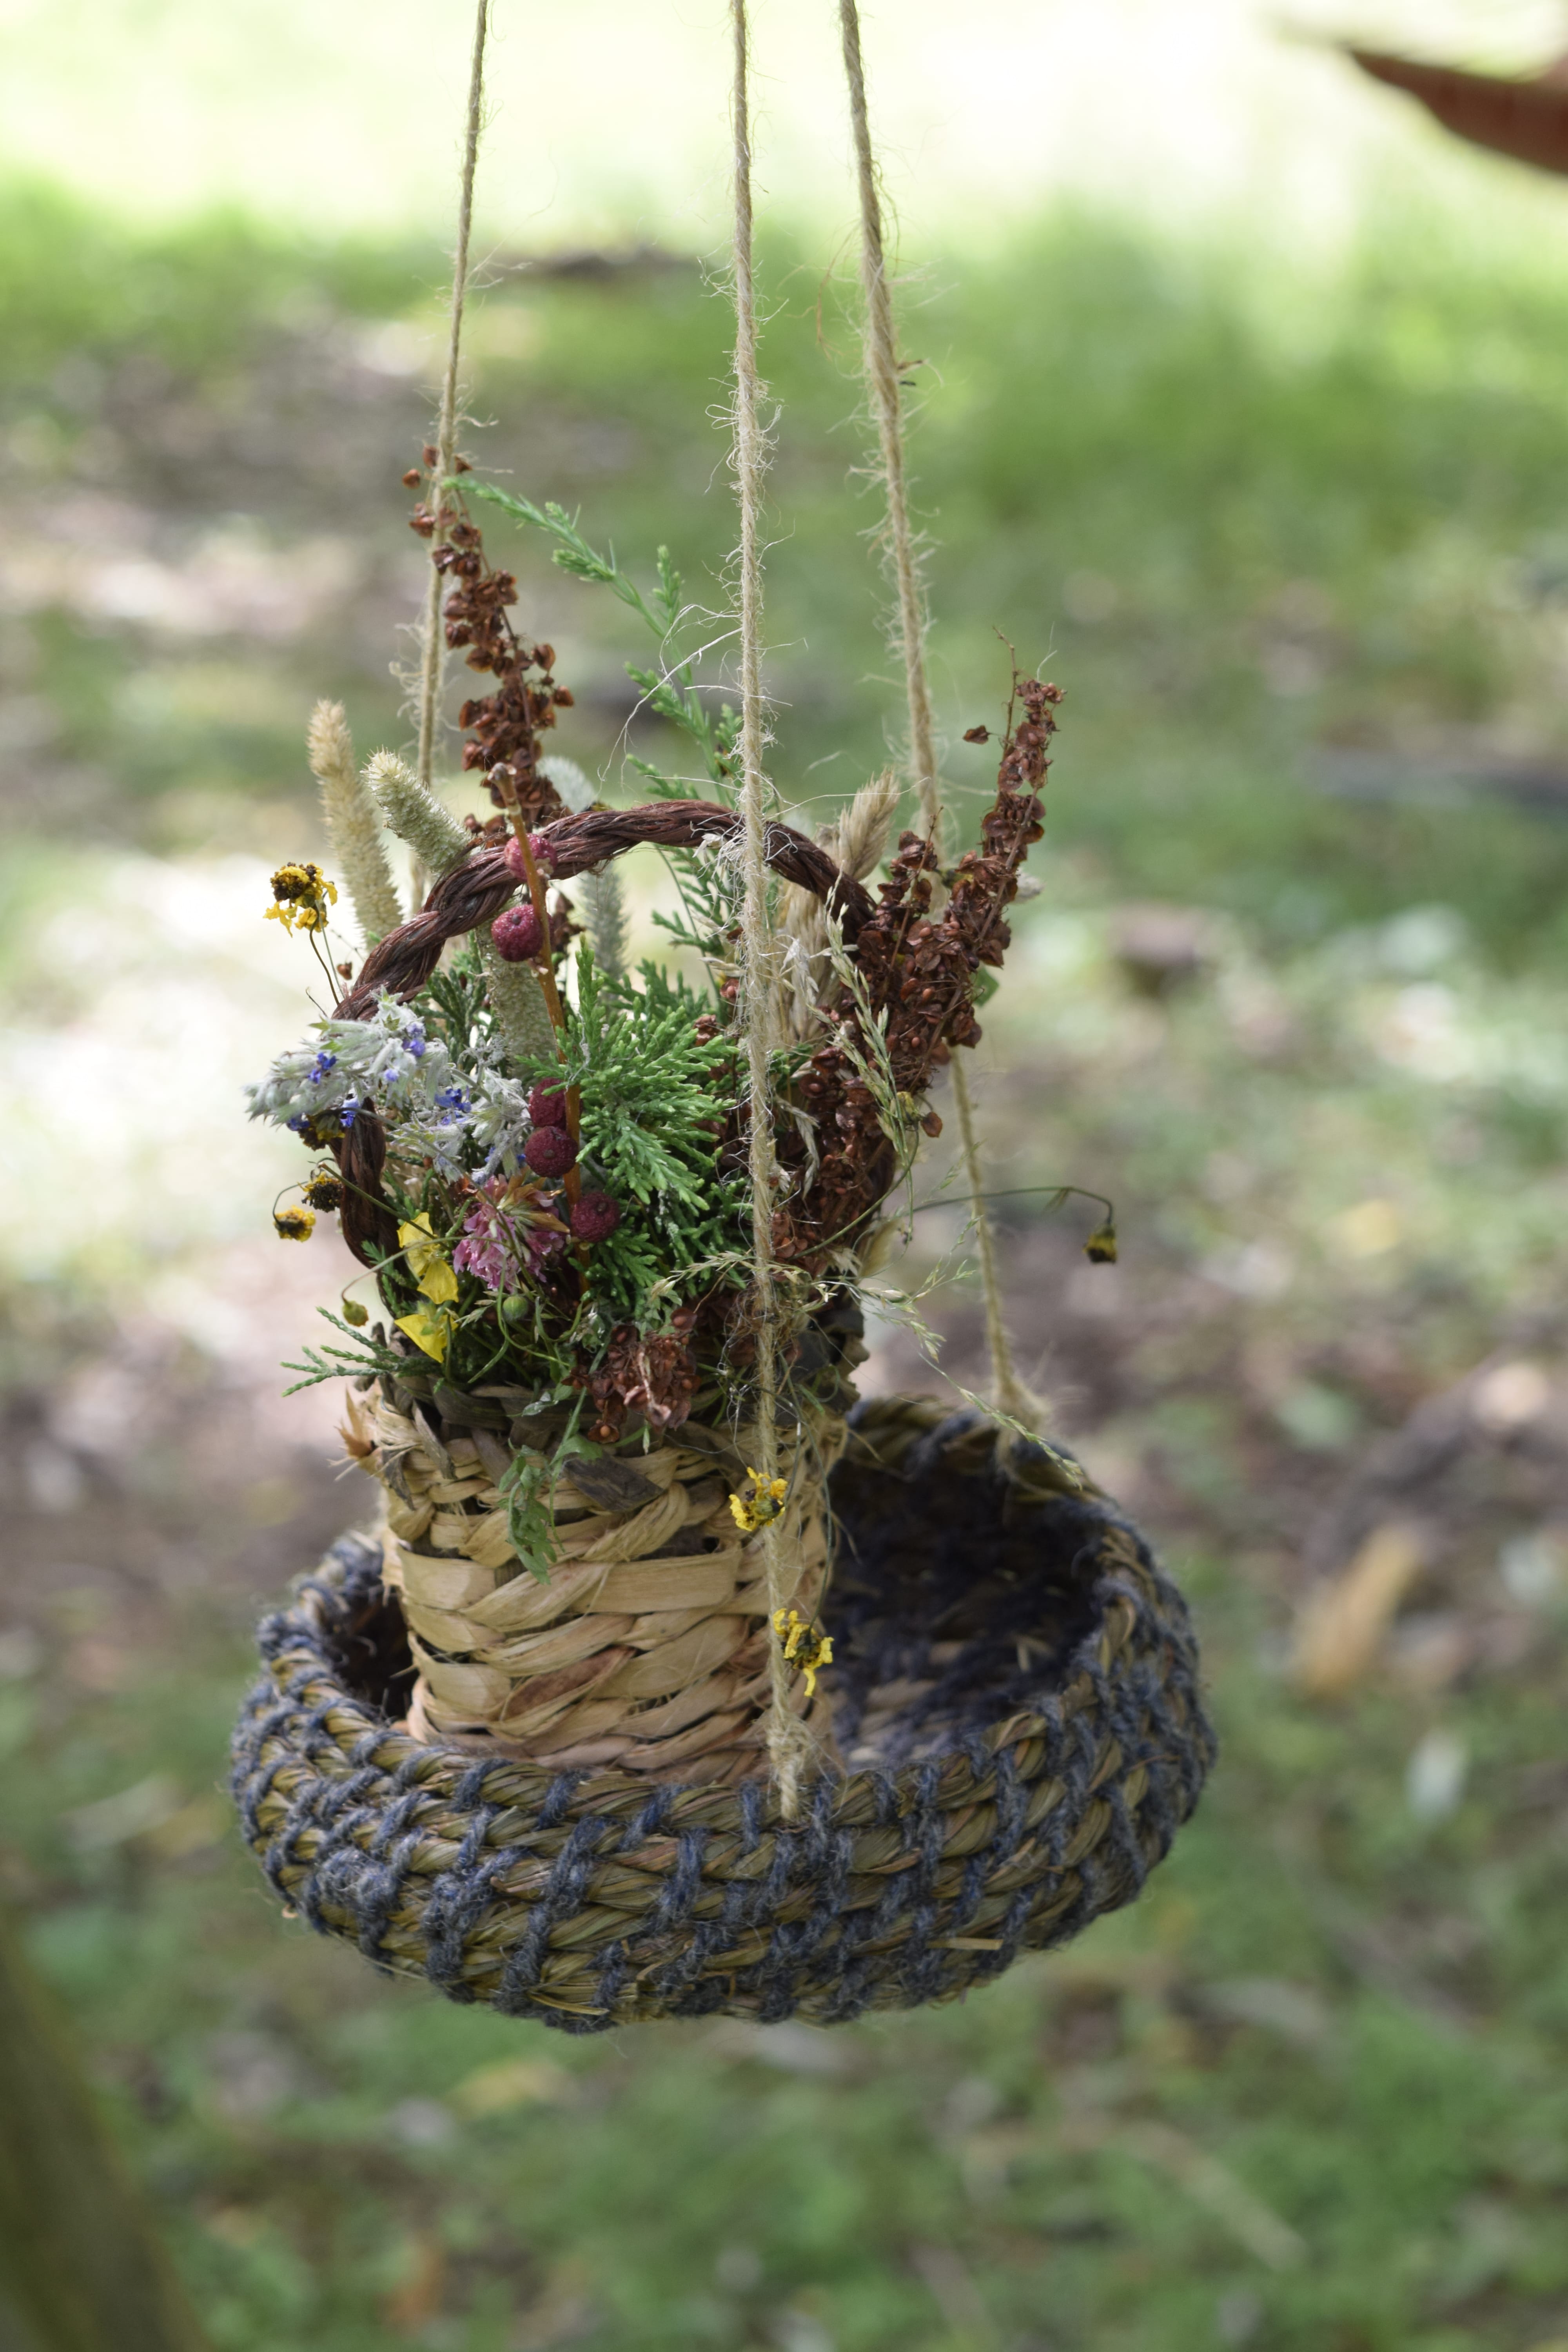 a creative coiled basket with a twined basket planter inside